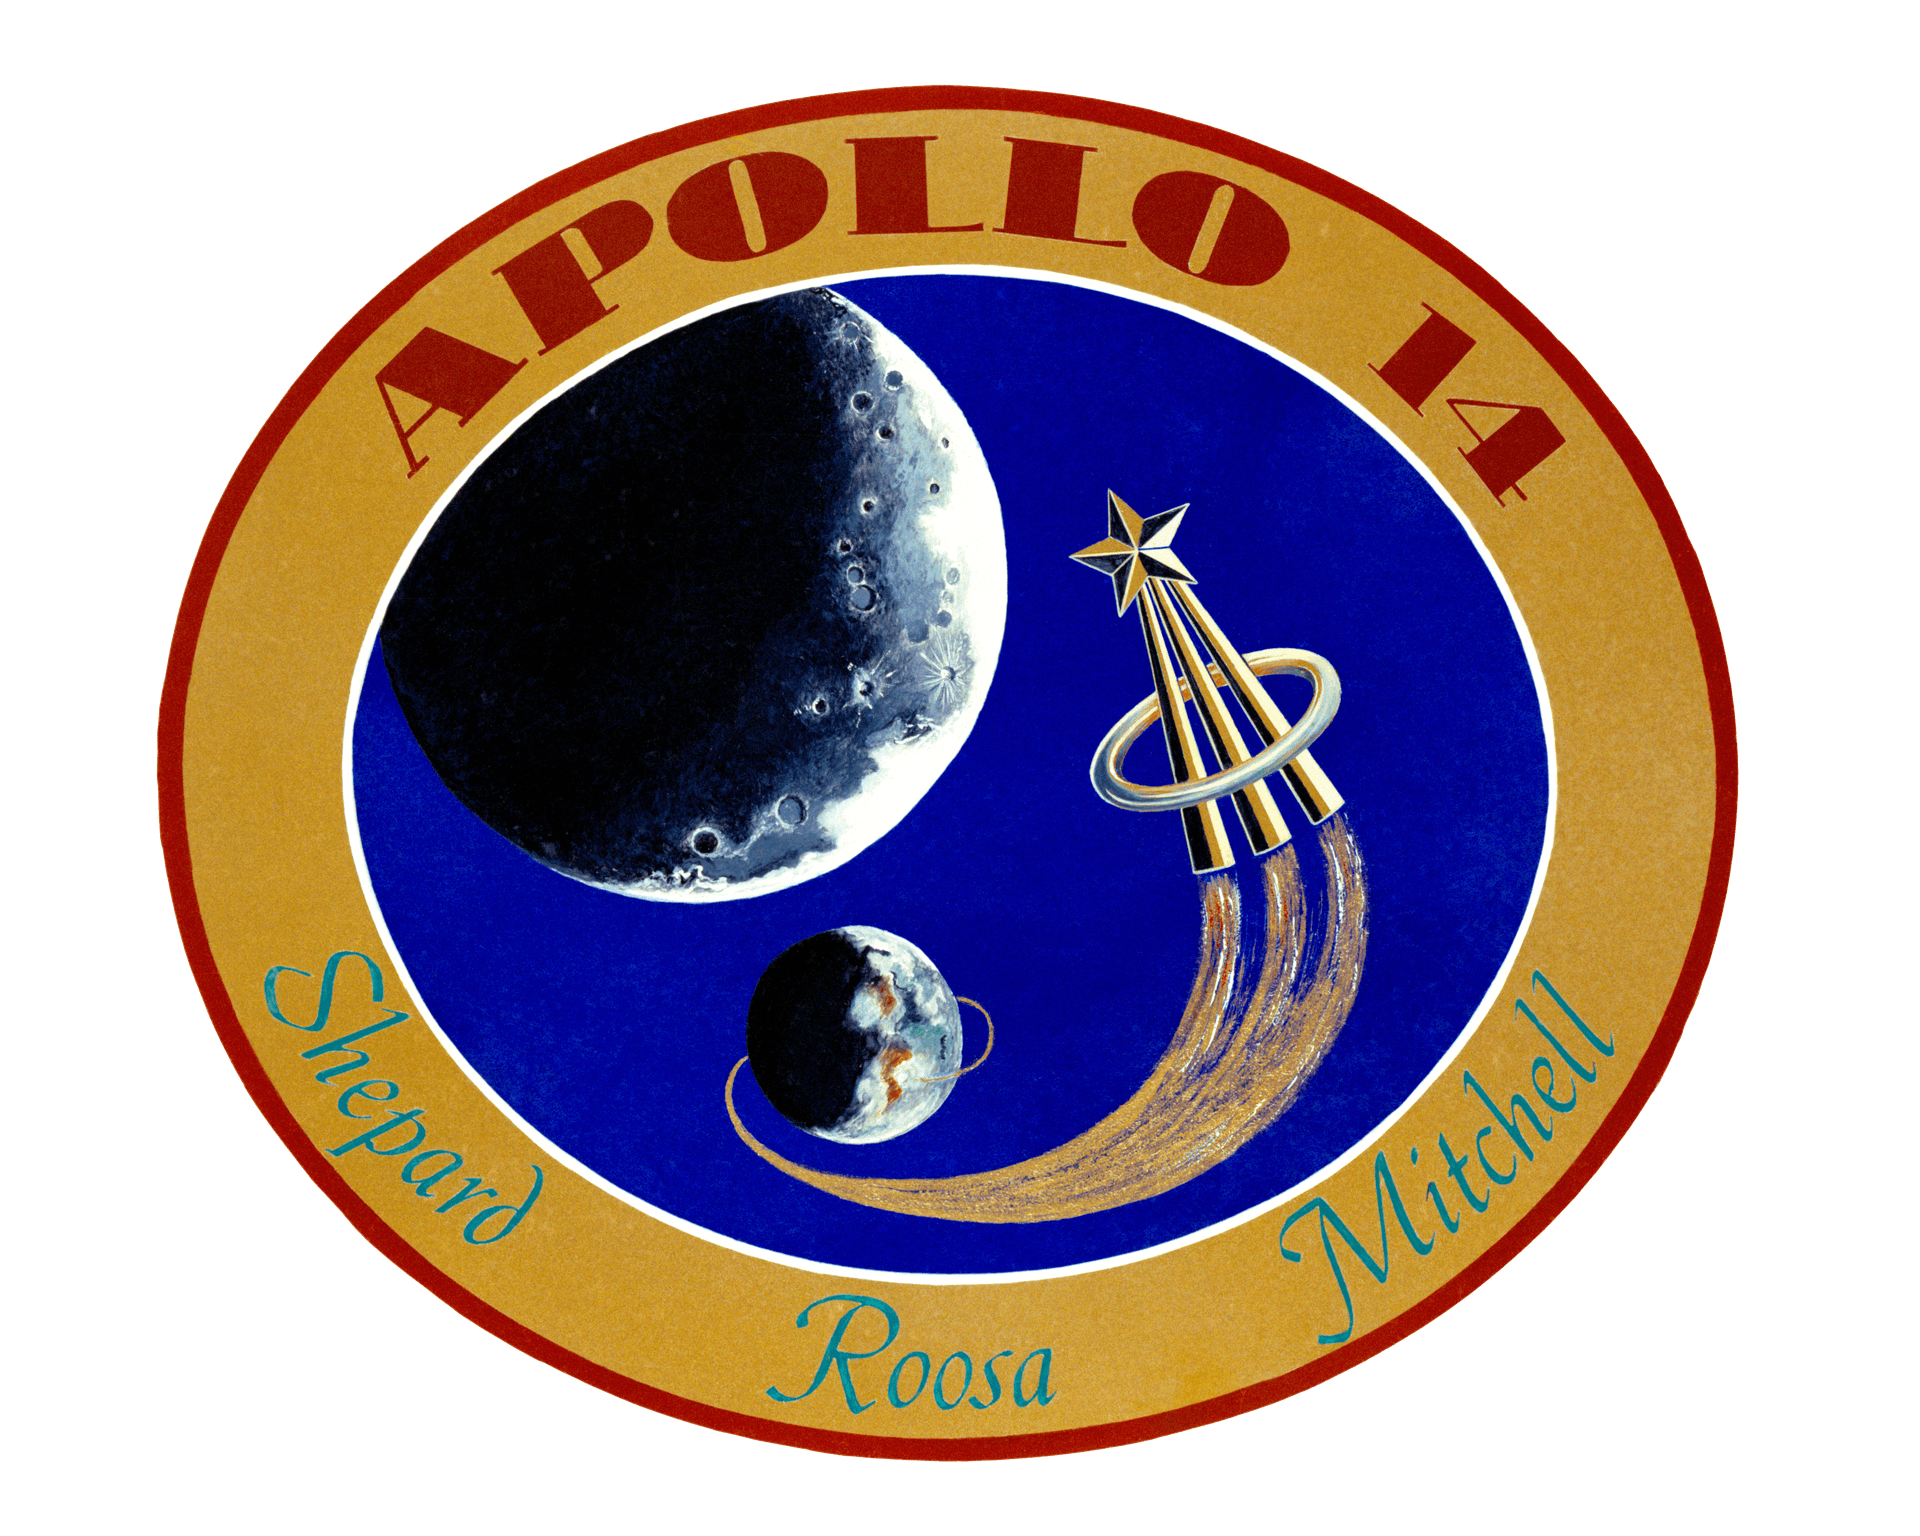 Mission patch for Apollo 14